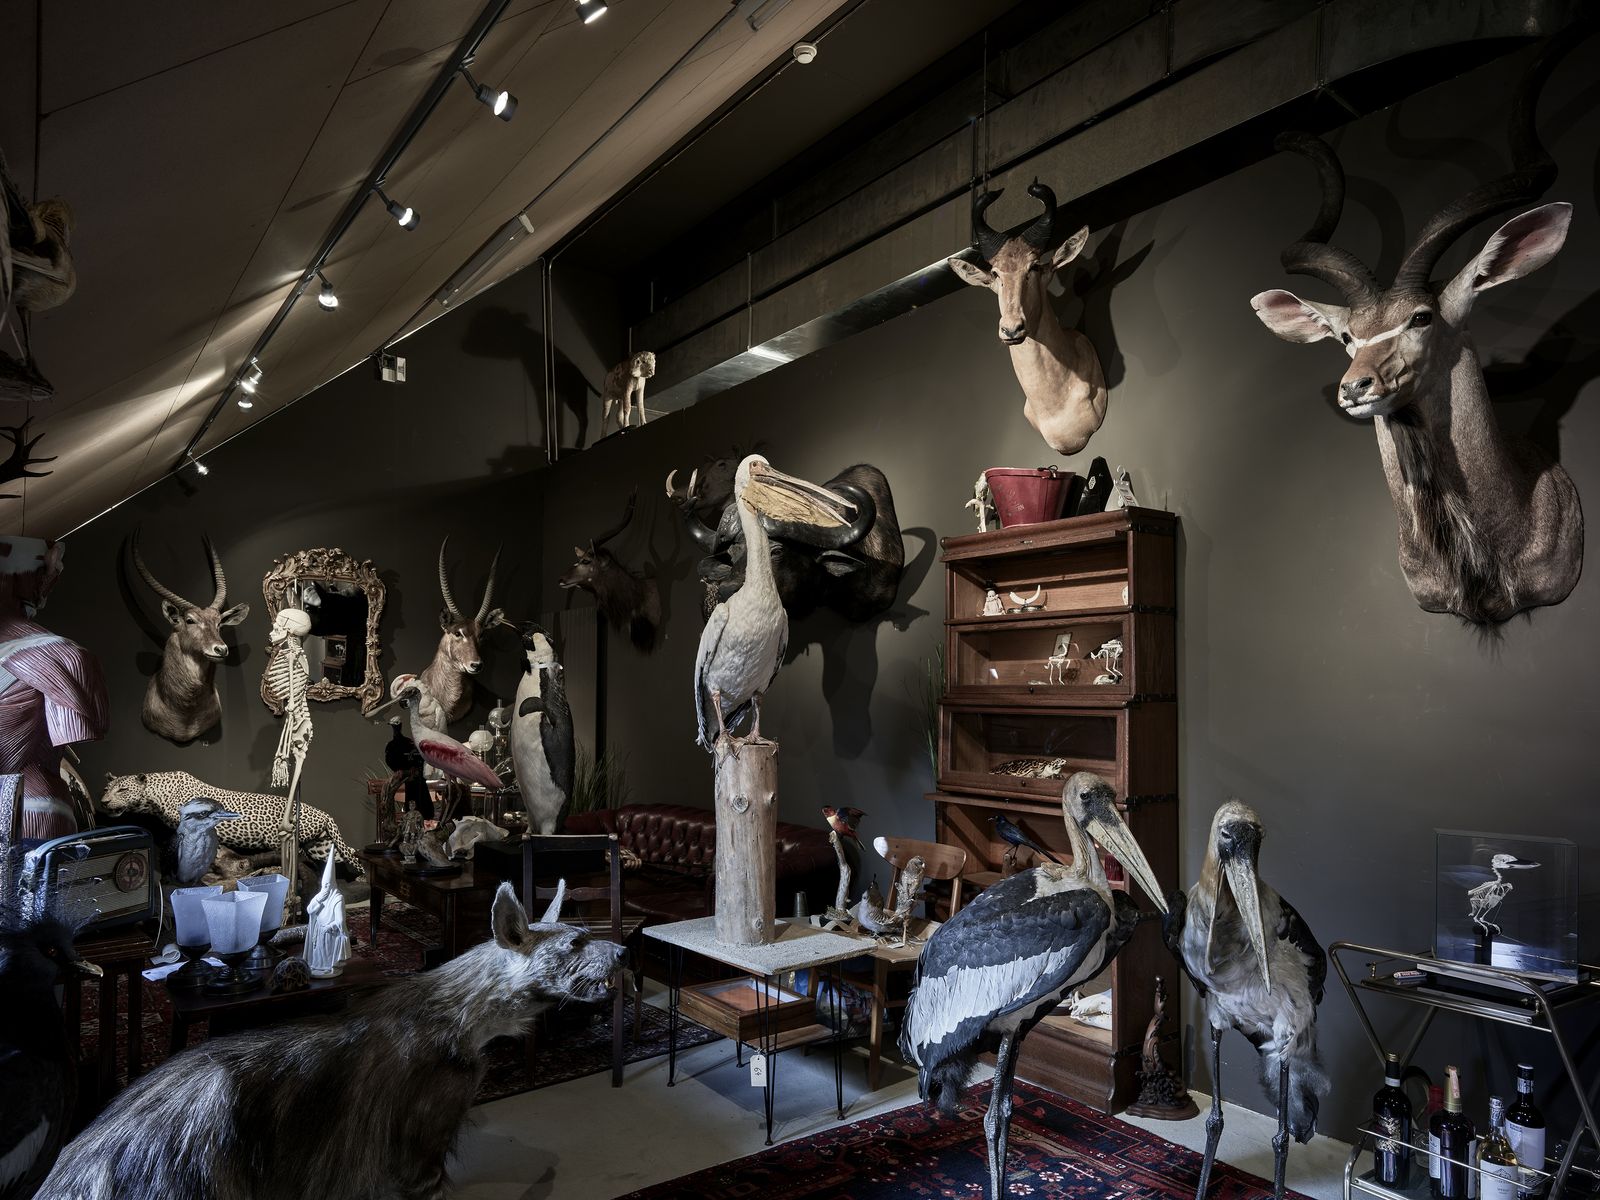 © Kostas Maros - Storage room of a taxidermist and magician in Zürich. This room is full of surprises.